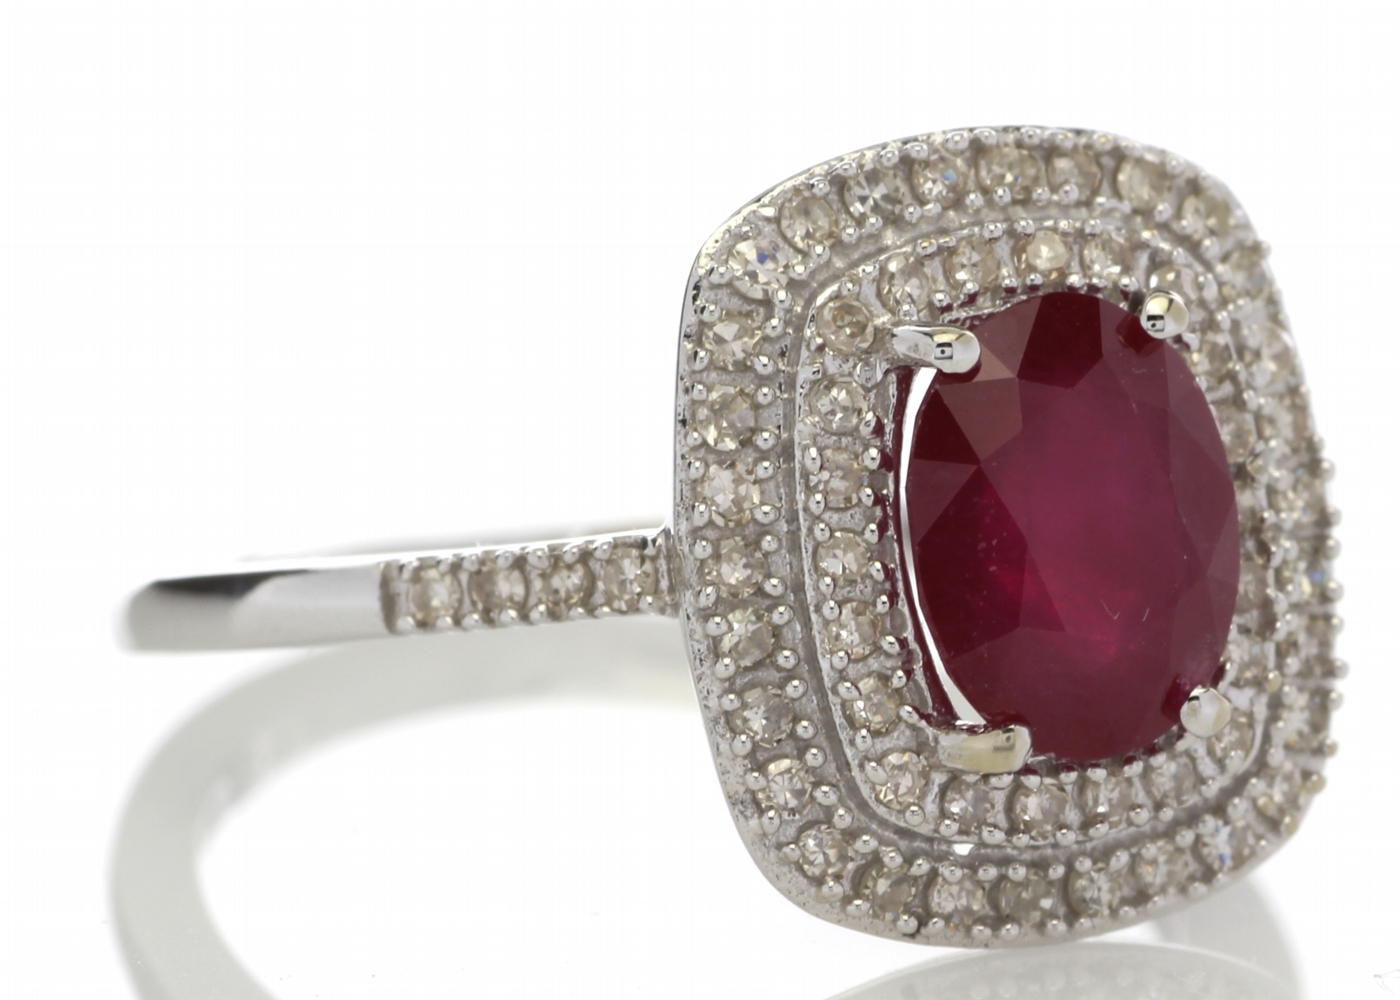 9ct White Gold Oval Ruby And Diamond Cluster Diamond Ring 0.33 Carats - Image 4 of 5